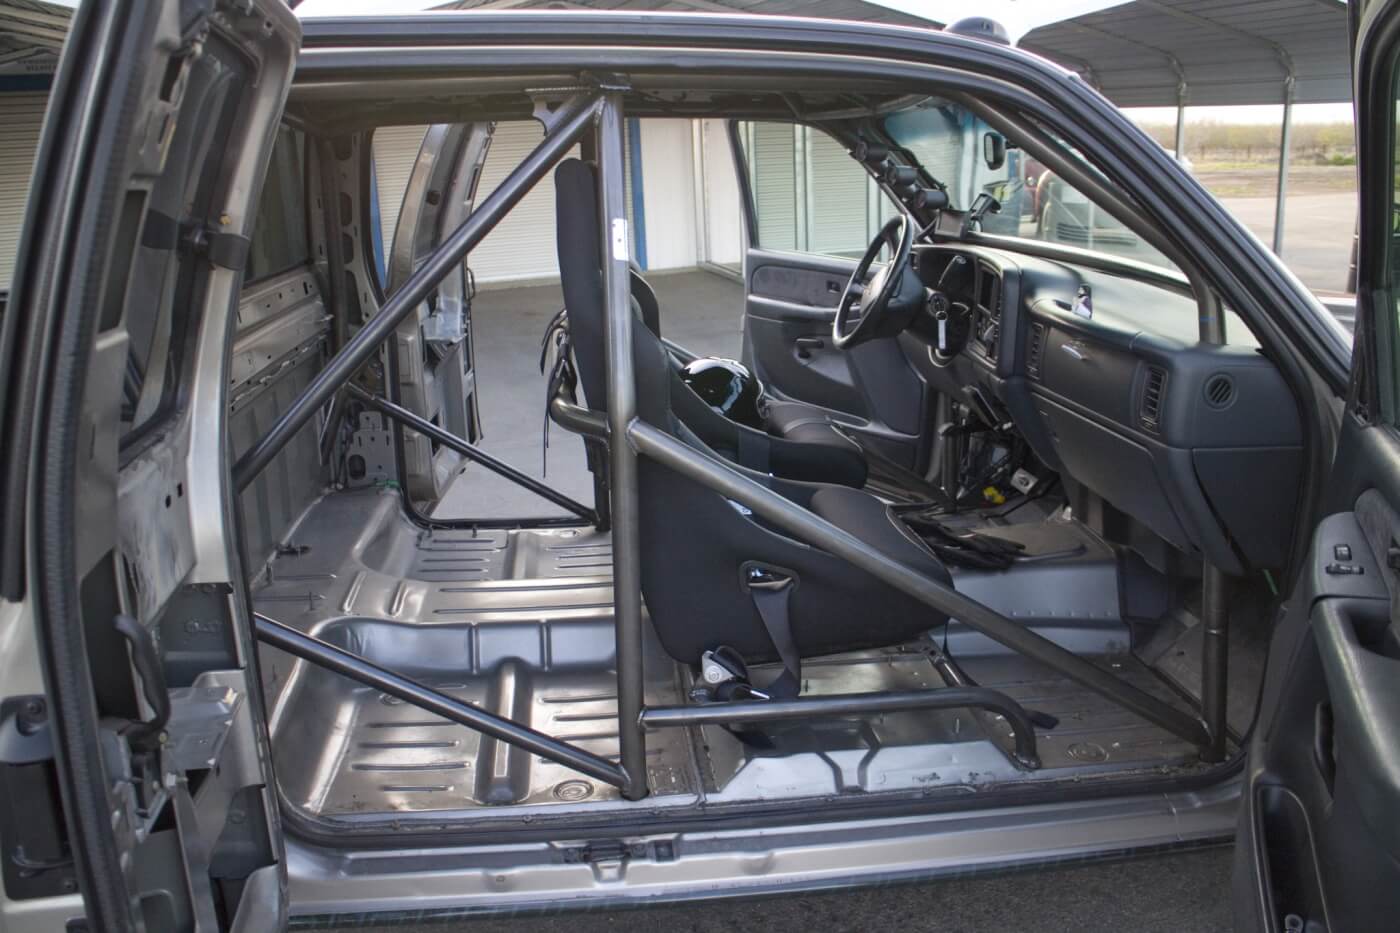 To lighten the truck, the interior was stripped out. A cage from Rollover Motorsports was installed for safety. The stock seats were replaced with a pair of Corbeau seats with 5-point belts.